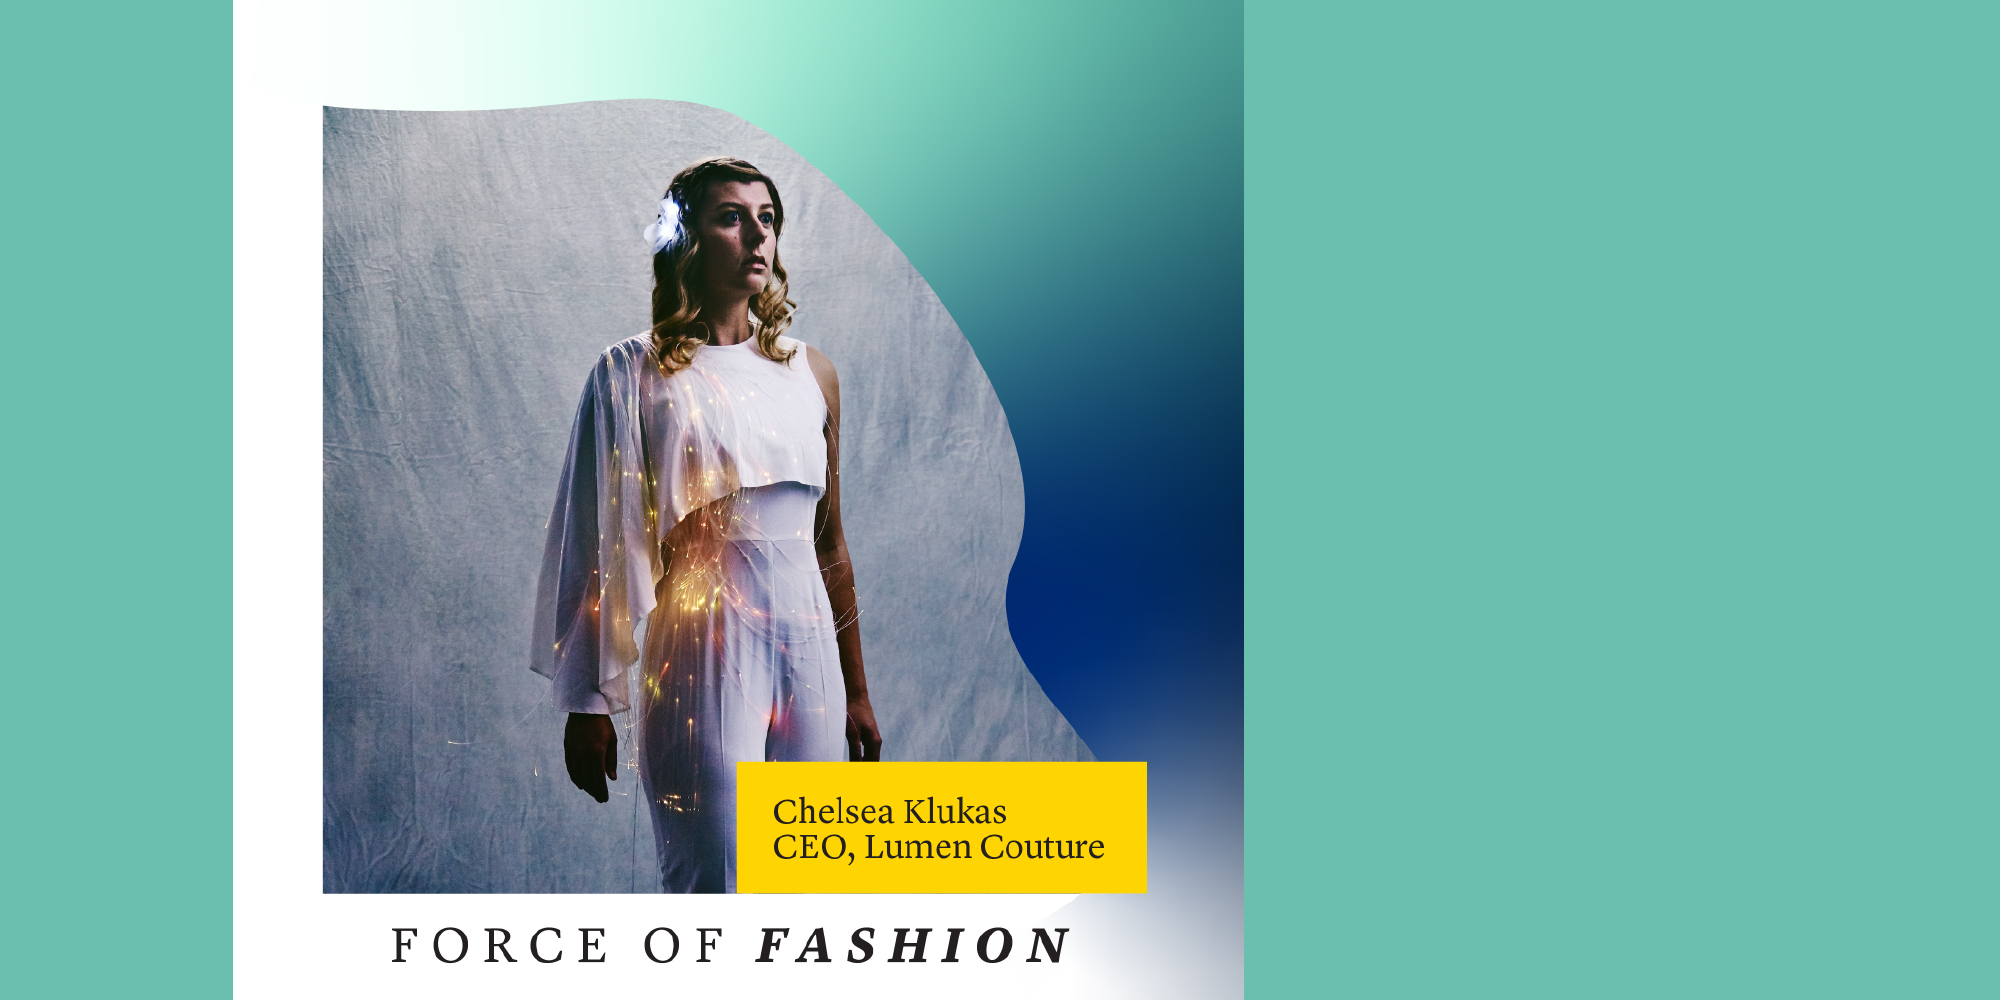 Fashion focused event series poster with image of futuristic work by Chelsea Klukas, CEO of Lumen Couture, an internationally acclaimed fashion technology organization